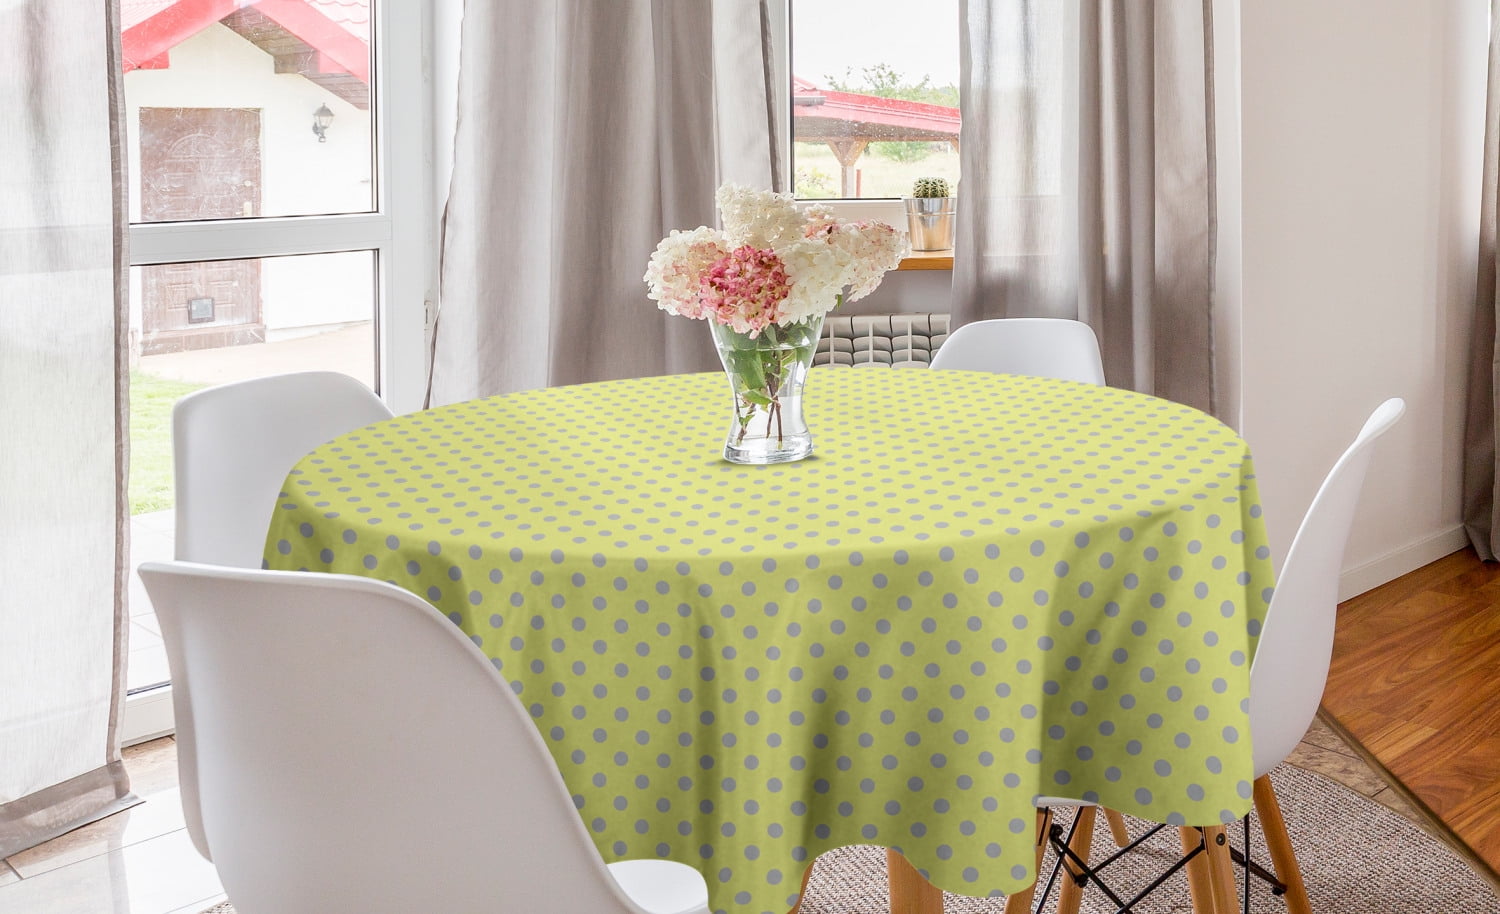 Ambesonne Abstract Tablecloth Continuous Half Circles Japanese Inspired Intricate Design Rectangular Table Cover for Dining Room Kitchen Decor Pastel Yellow Pale Grey 60 X 90